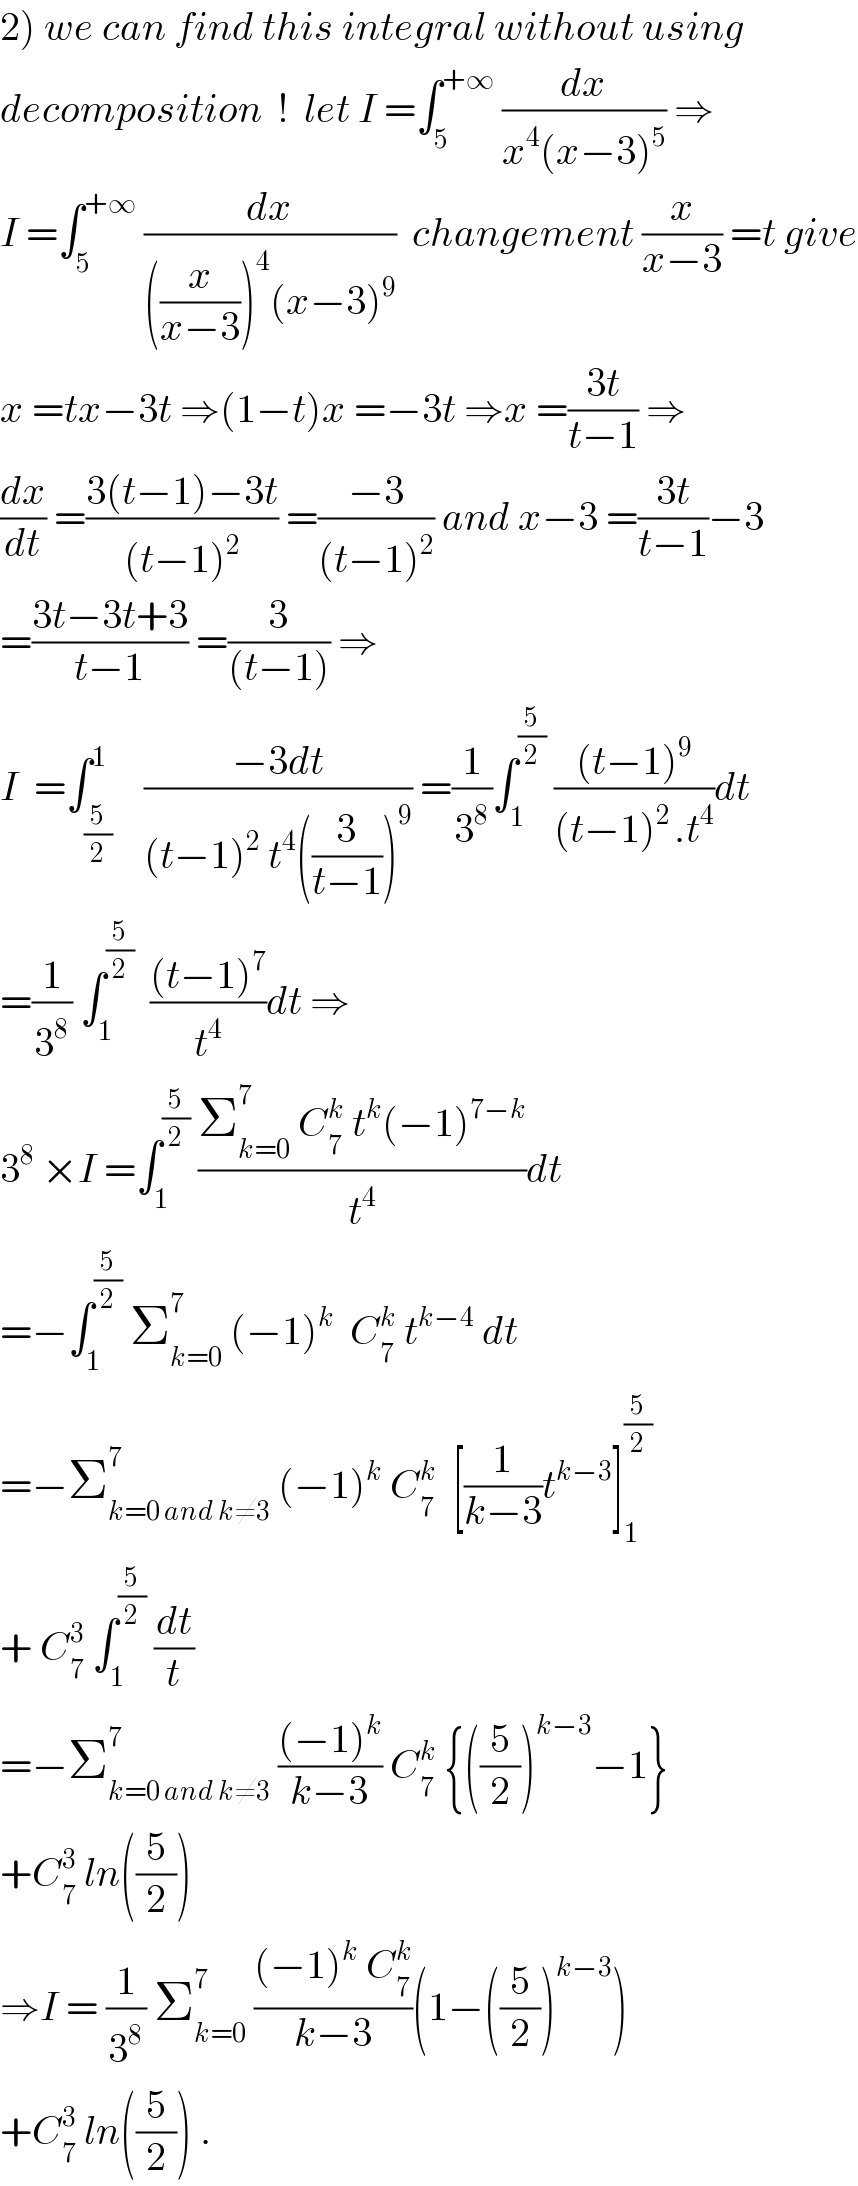 2) we can find this integral without using  decomposition  !  let I =∫_5 ^(+∞)  (dx/(x^4 (x−3)^5 )) ⇒  I =∫_5 ^(+∞)  (dx/(((x/(x−3)))^4 (x−3)^9 ))  changement (x/(x−3)) =t give  x =tx−3t ⇒(1−t)x =−3t ⇒x =((3t)/(t−1)) ⇒  (dx/dt) =((3(t−1)−3t)/((t−1)^2 )) =((−3)/((t−1)^2 )) and x−3 =((3t)/(t−1))−3  =((3t−3t+3)/(t−1)) =(3/((t−1))) ⇒  I  =∫_(5/2) ^1    ((−3dt)/((t−1)^2  t^4 ((3/(t−1)))^9 )) =(1/3^8 )∫_1 ^(5/2)  (((t−1)^9 )/((t−1)^(2 ) .t^4 ))dt  =(1/3^8 ) ∫_1 ^(5/2)   (((t−1)^7 )/t^4 )dt ⇒  3^8  ×I =∫_1 ^(5/2)  ((Σ_(k=0) ^7  C_7 ^k  t^k (−1)^(7−k) )/t^4 )dt  =−∫_1 ^(5/2)  Σ_(k=0) ^7  (−1)^k   C_7 ^k  t^(k−4)  dt  =−Σ_(k=0 and k≠3) ^7  (−1)^k  C_7 ^k   [(1/(k−3))t^(k−3) ]_1 ^(5/2)   + C_7 ^3  ∫_1 ^(5/2)  (dt/t)  =−Σ_(k=0 and k≠3) ^7  (((−1)^k )/(k−3)) C_7 ^k  {((5/2))^(k−3) −1}  +C_7 ^3  ln((5/2))   ⇒I = (1/3^8 ) Σ_(k=0) ^7  (((−1)^k  C_7 ^k )/(k−3))(1−((5/2))^(k−3) )  +C_7 ^3  ln((5/2)) .  